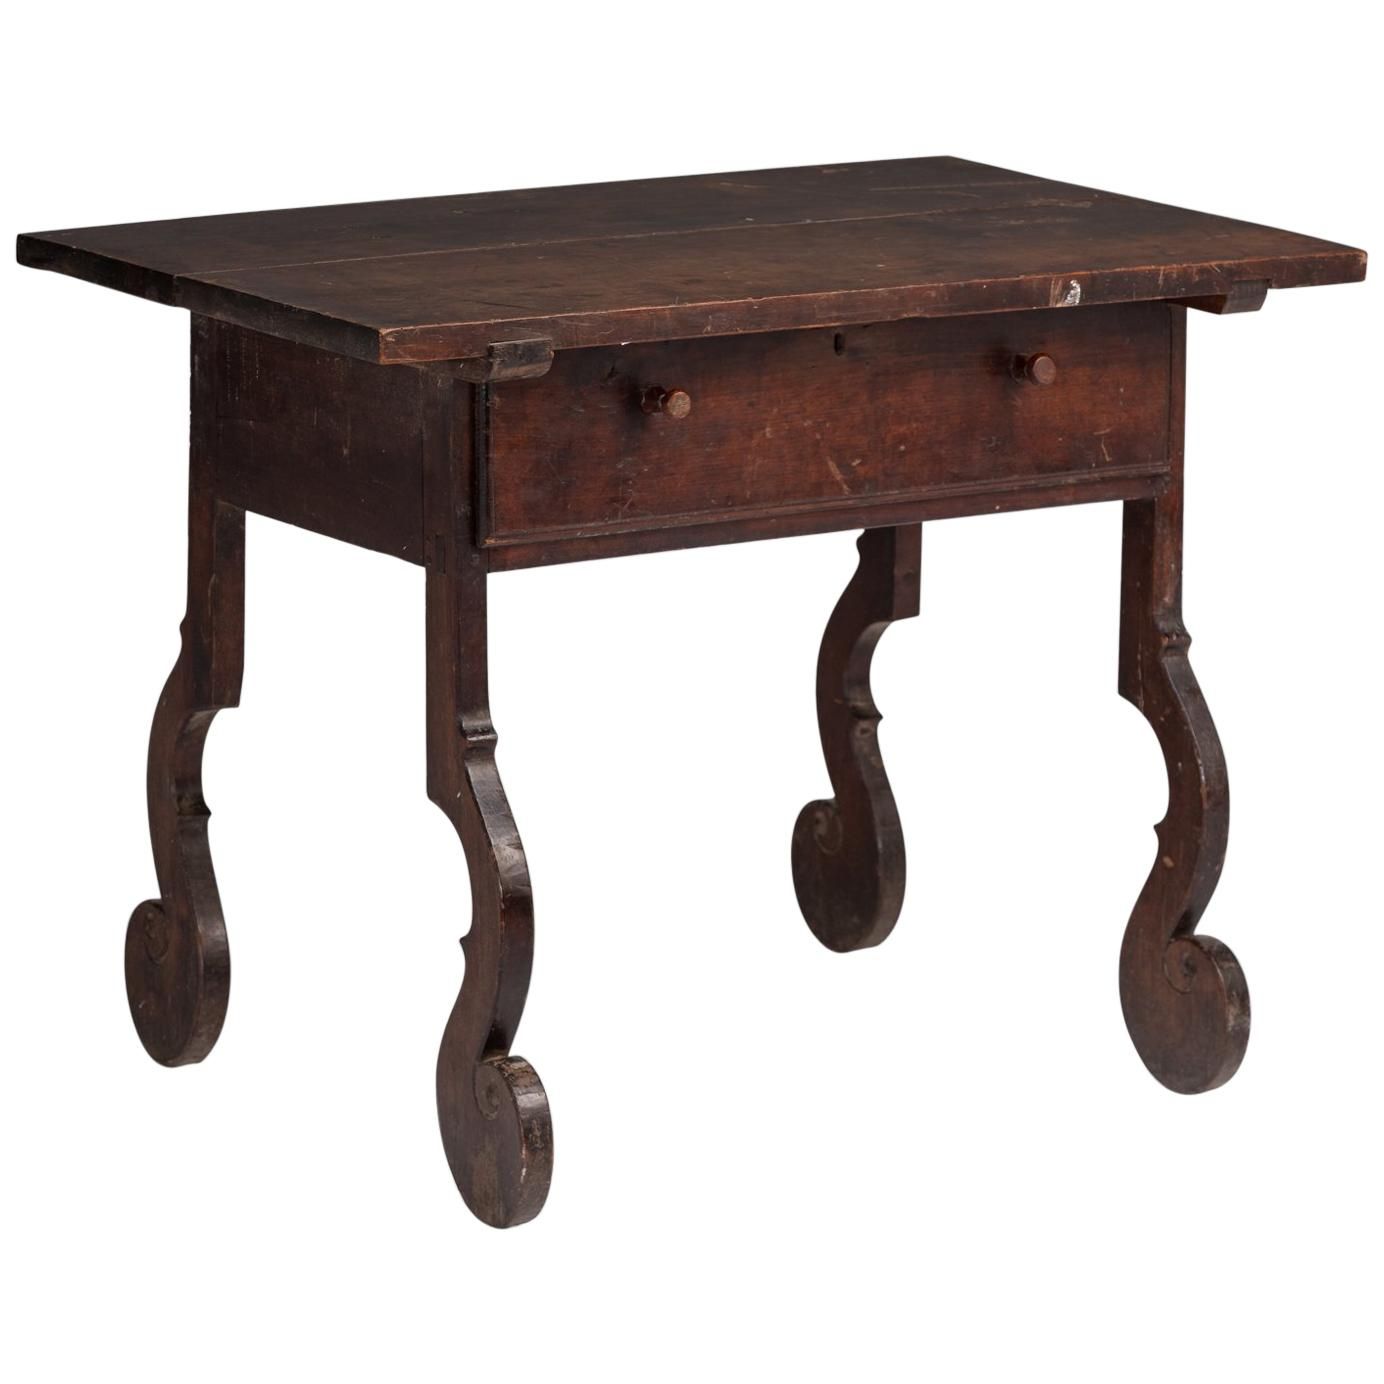 Antique And Vintage Tables – 71,780 For Sale At 1stdibs Inside Oak & Brass Stacking Media Console Tables (Photo 28 of 30)